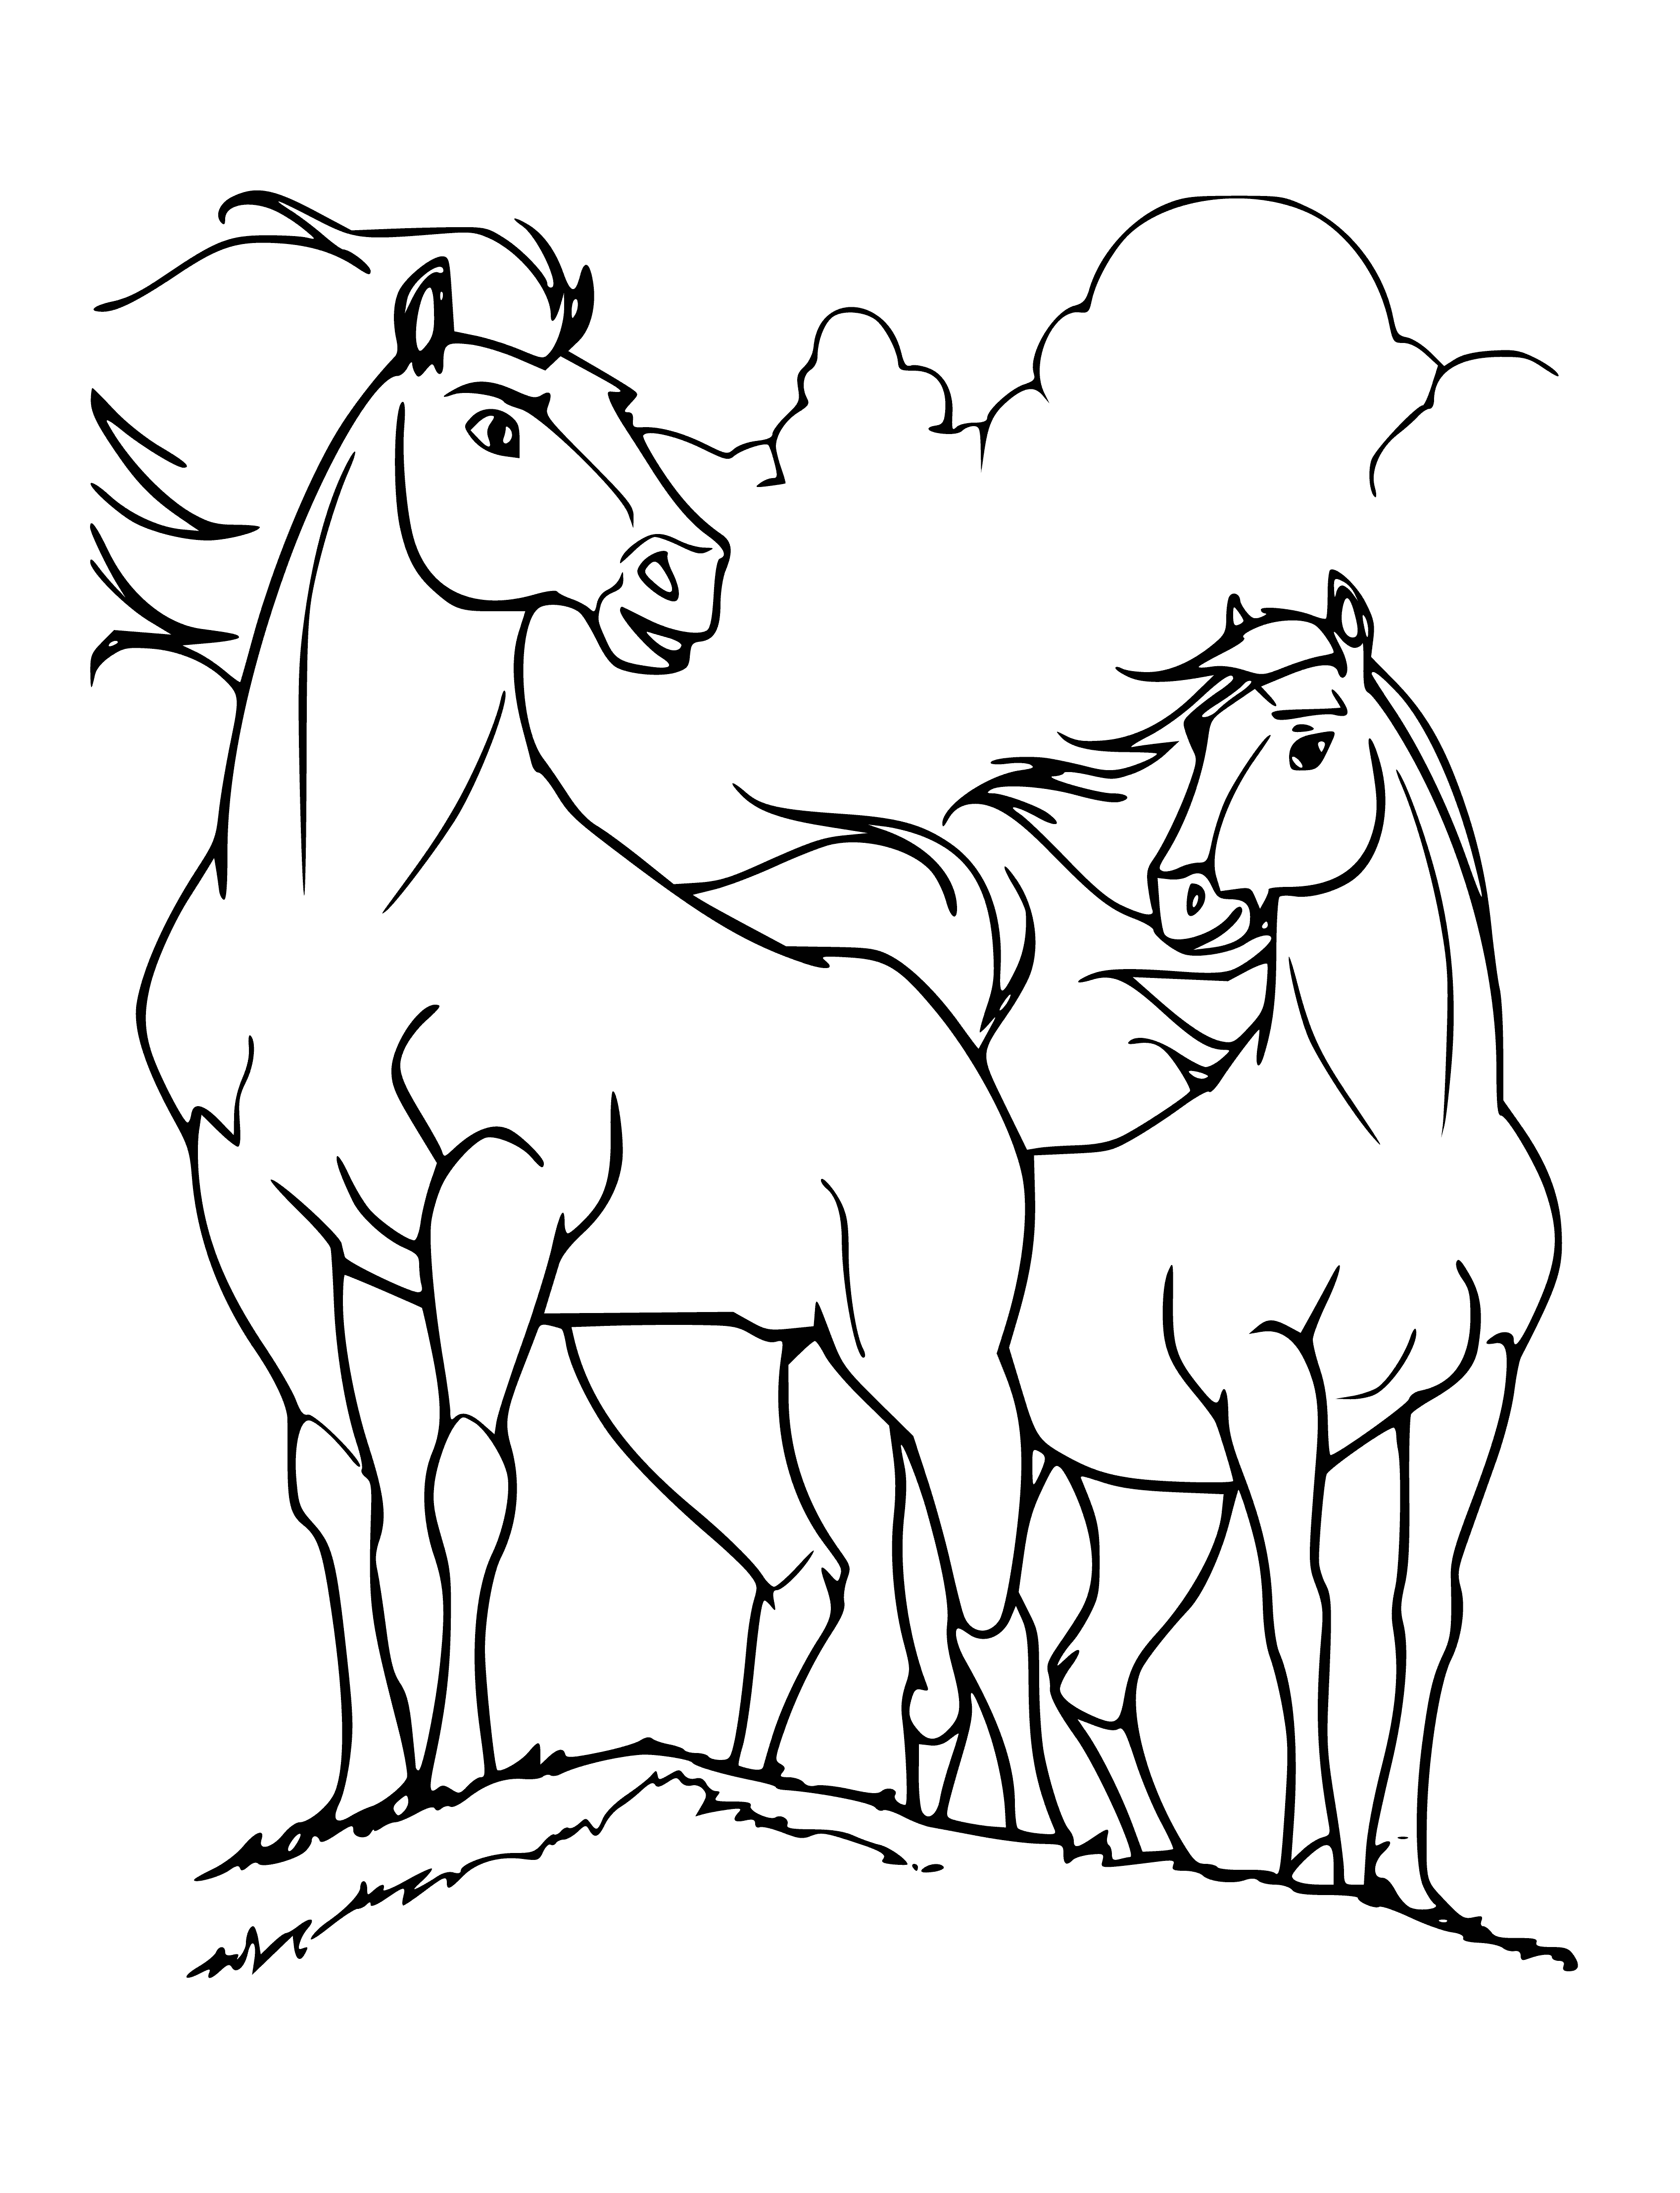 coloring page: White horse spirit stands atop hill, black mane & tail, scenery of forest in background, gazing upon viewer.